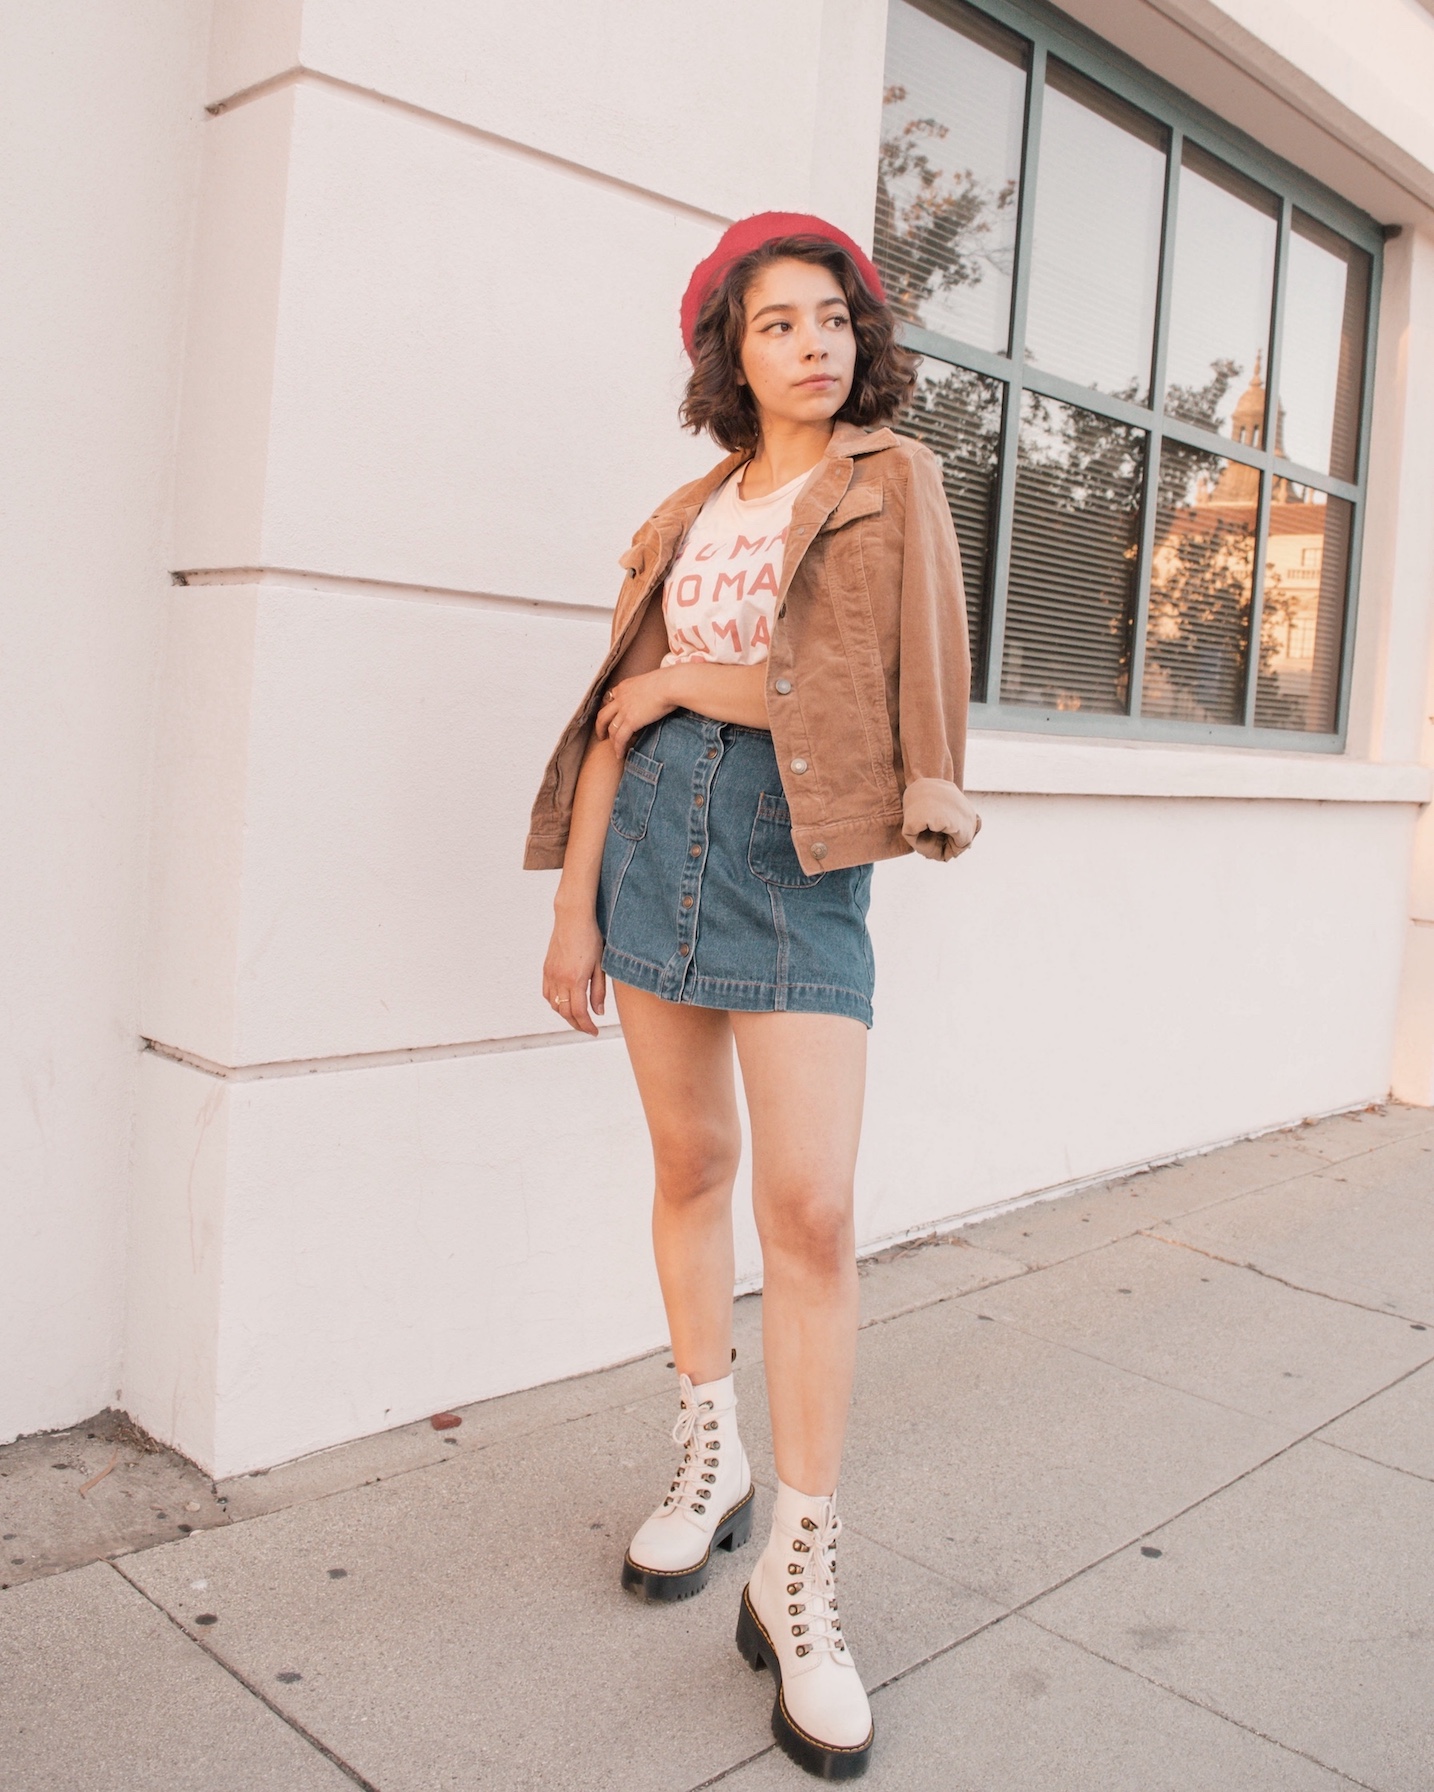 Week Of Outfits Series A Week Of Self Expressive Outfits With Aja Duran From Aja With Love